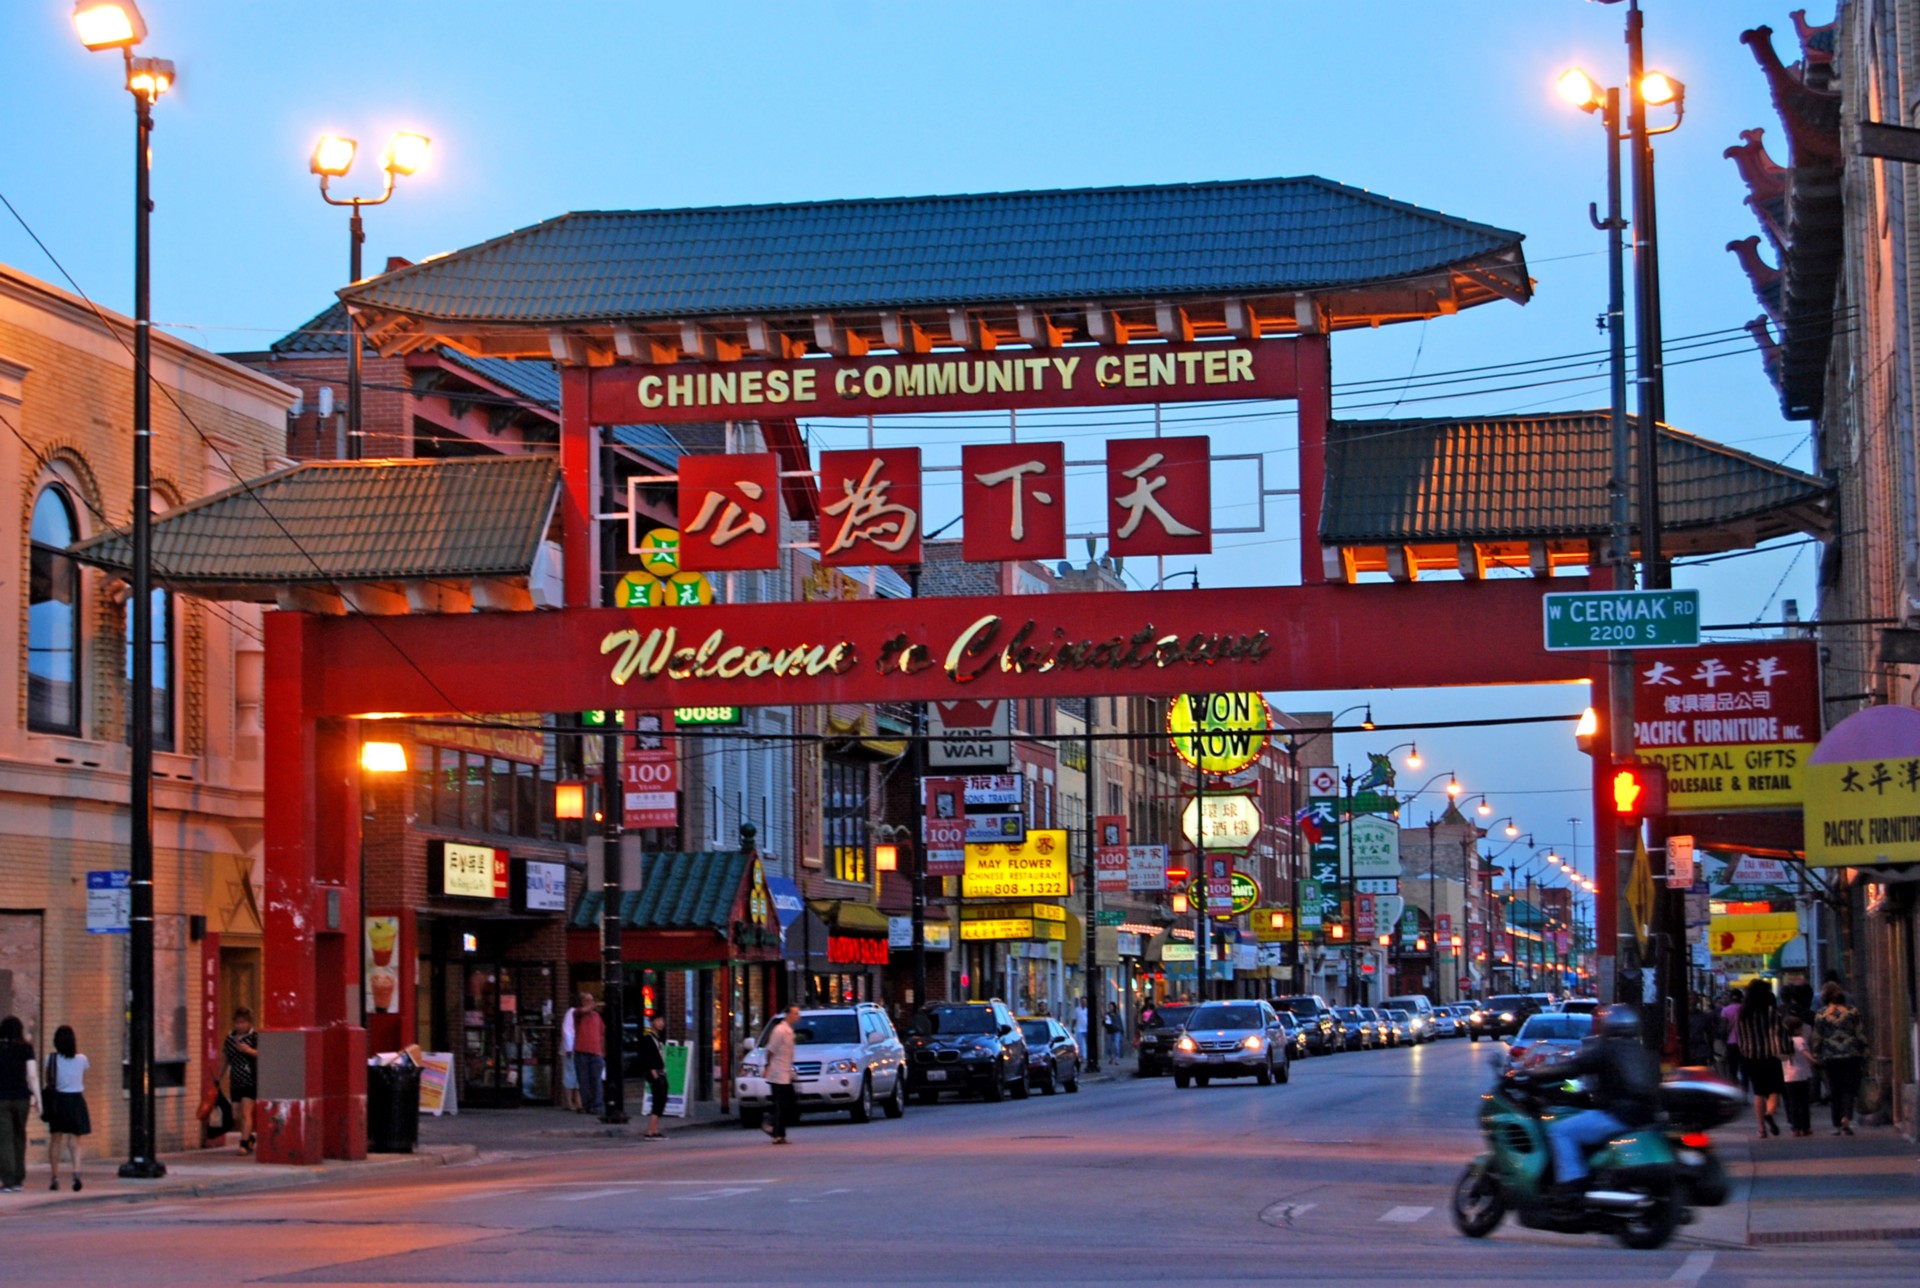 Commercialization in Chinatown – Religion, Ethnicity, and Race in ...